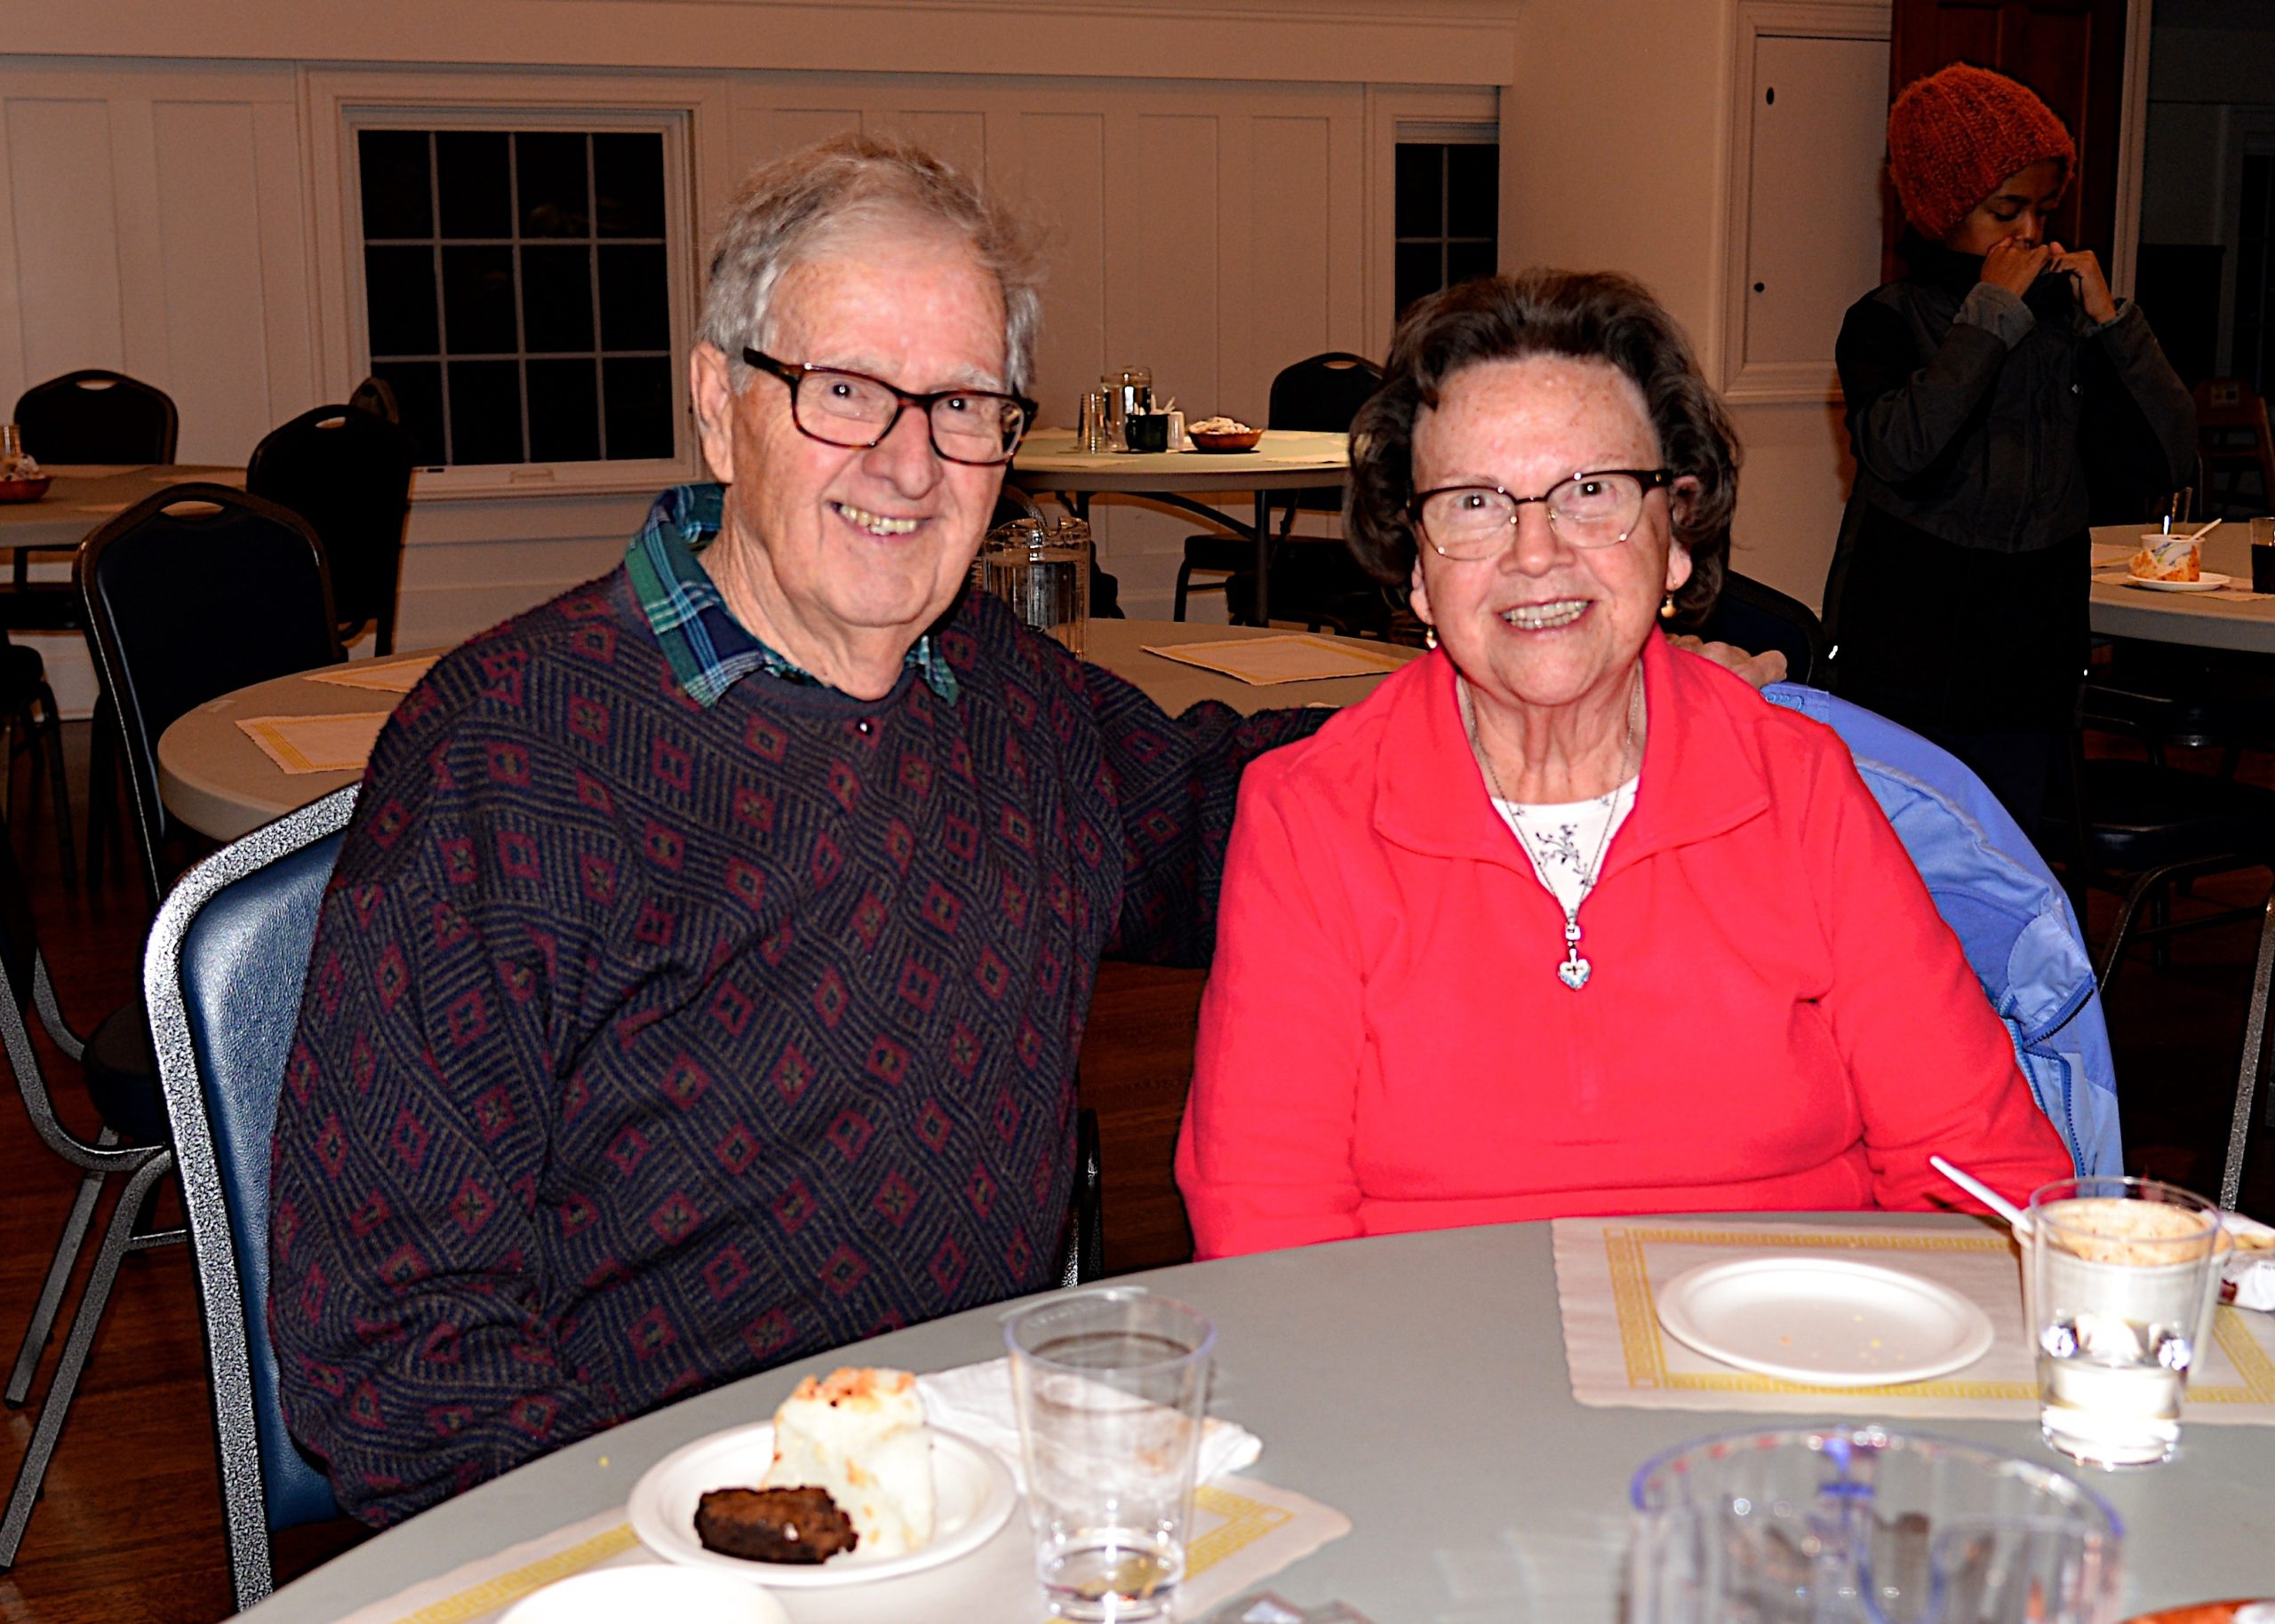 The deacons of the Amagansett Presbyterian Church hosted a Soup and Chili dinner on Saturday. Reverend Rob Stuart and Mary Vorpahl at the event. KYRIL BROMLEY 